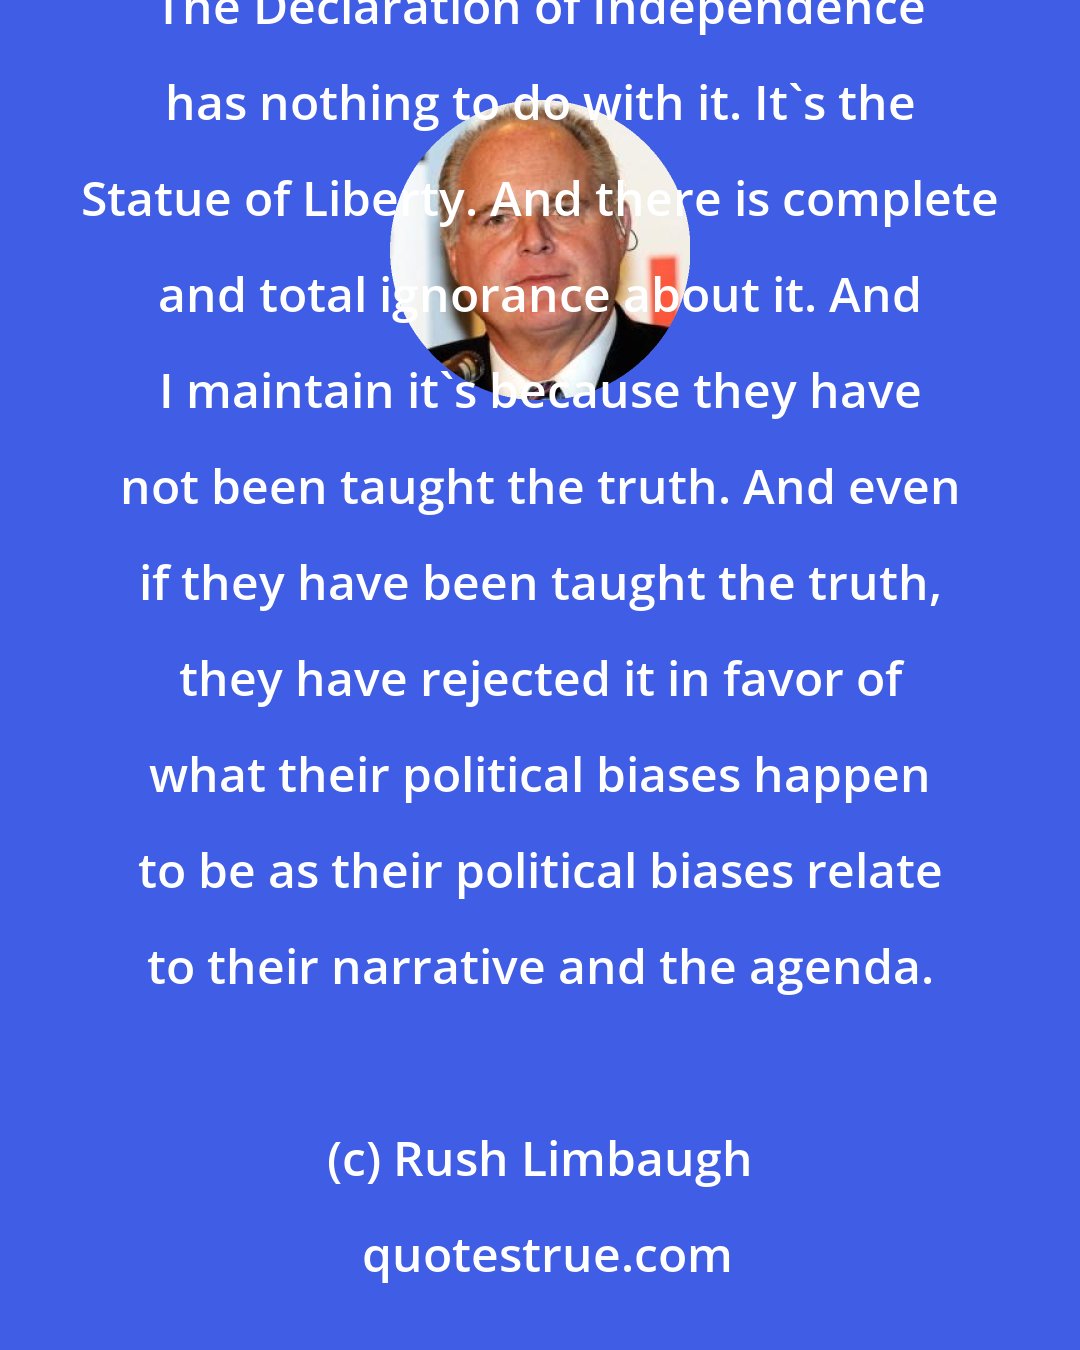 Rush Limbaugh: There are a number of Americans who've been taught that, that the Constitution has nothing to do with immigration. The Declaration of Independence has nothing to do with it. It's the Statue of Liberty. And there is complete and total ignorance about it. And I maintain it's because they have not been taught the truth. And even if they have been taught the truth, they have rejected it in favor of what their political biases happen to be as their political biases relate to their narrative and the agenda.